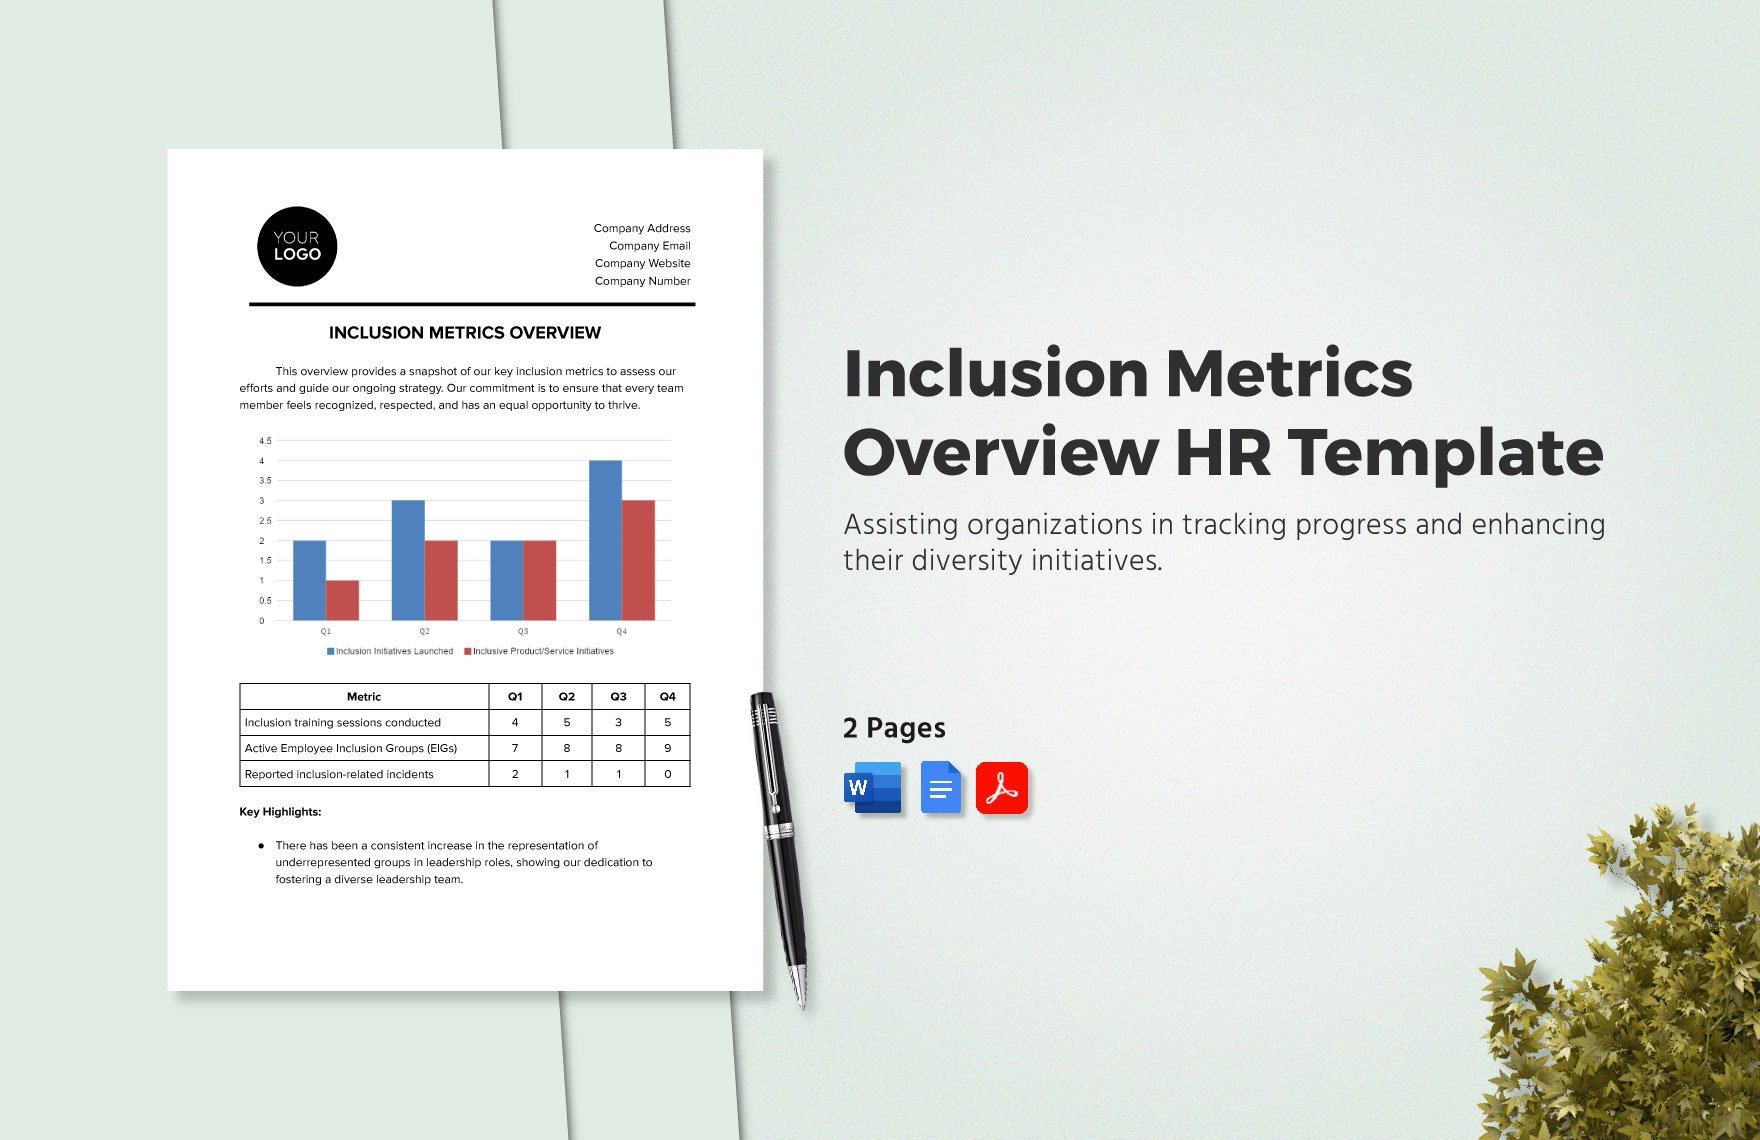 Inclusion Metrics Overview HR Template